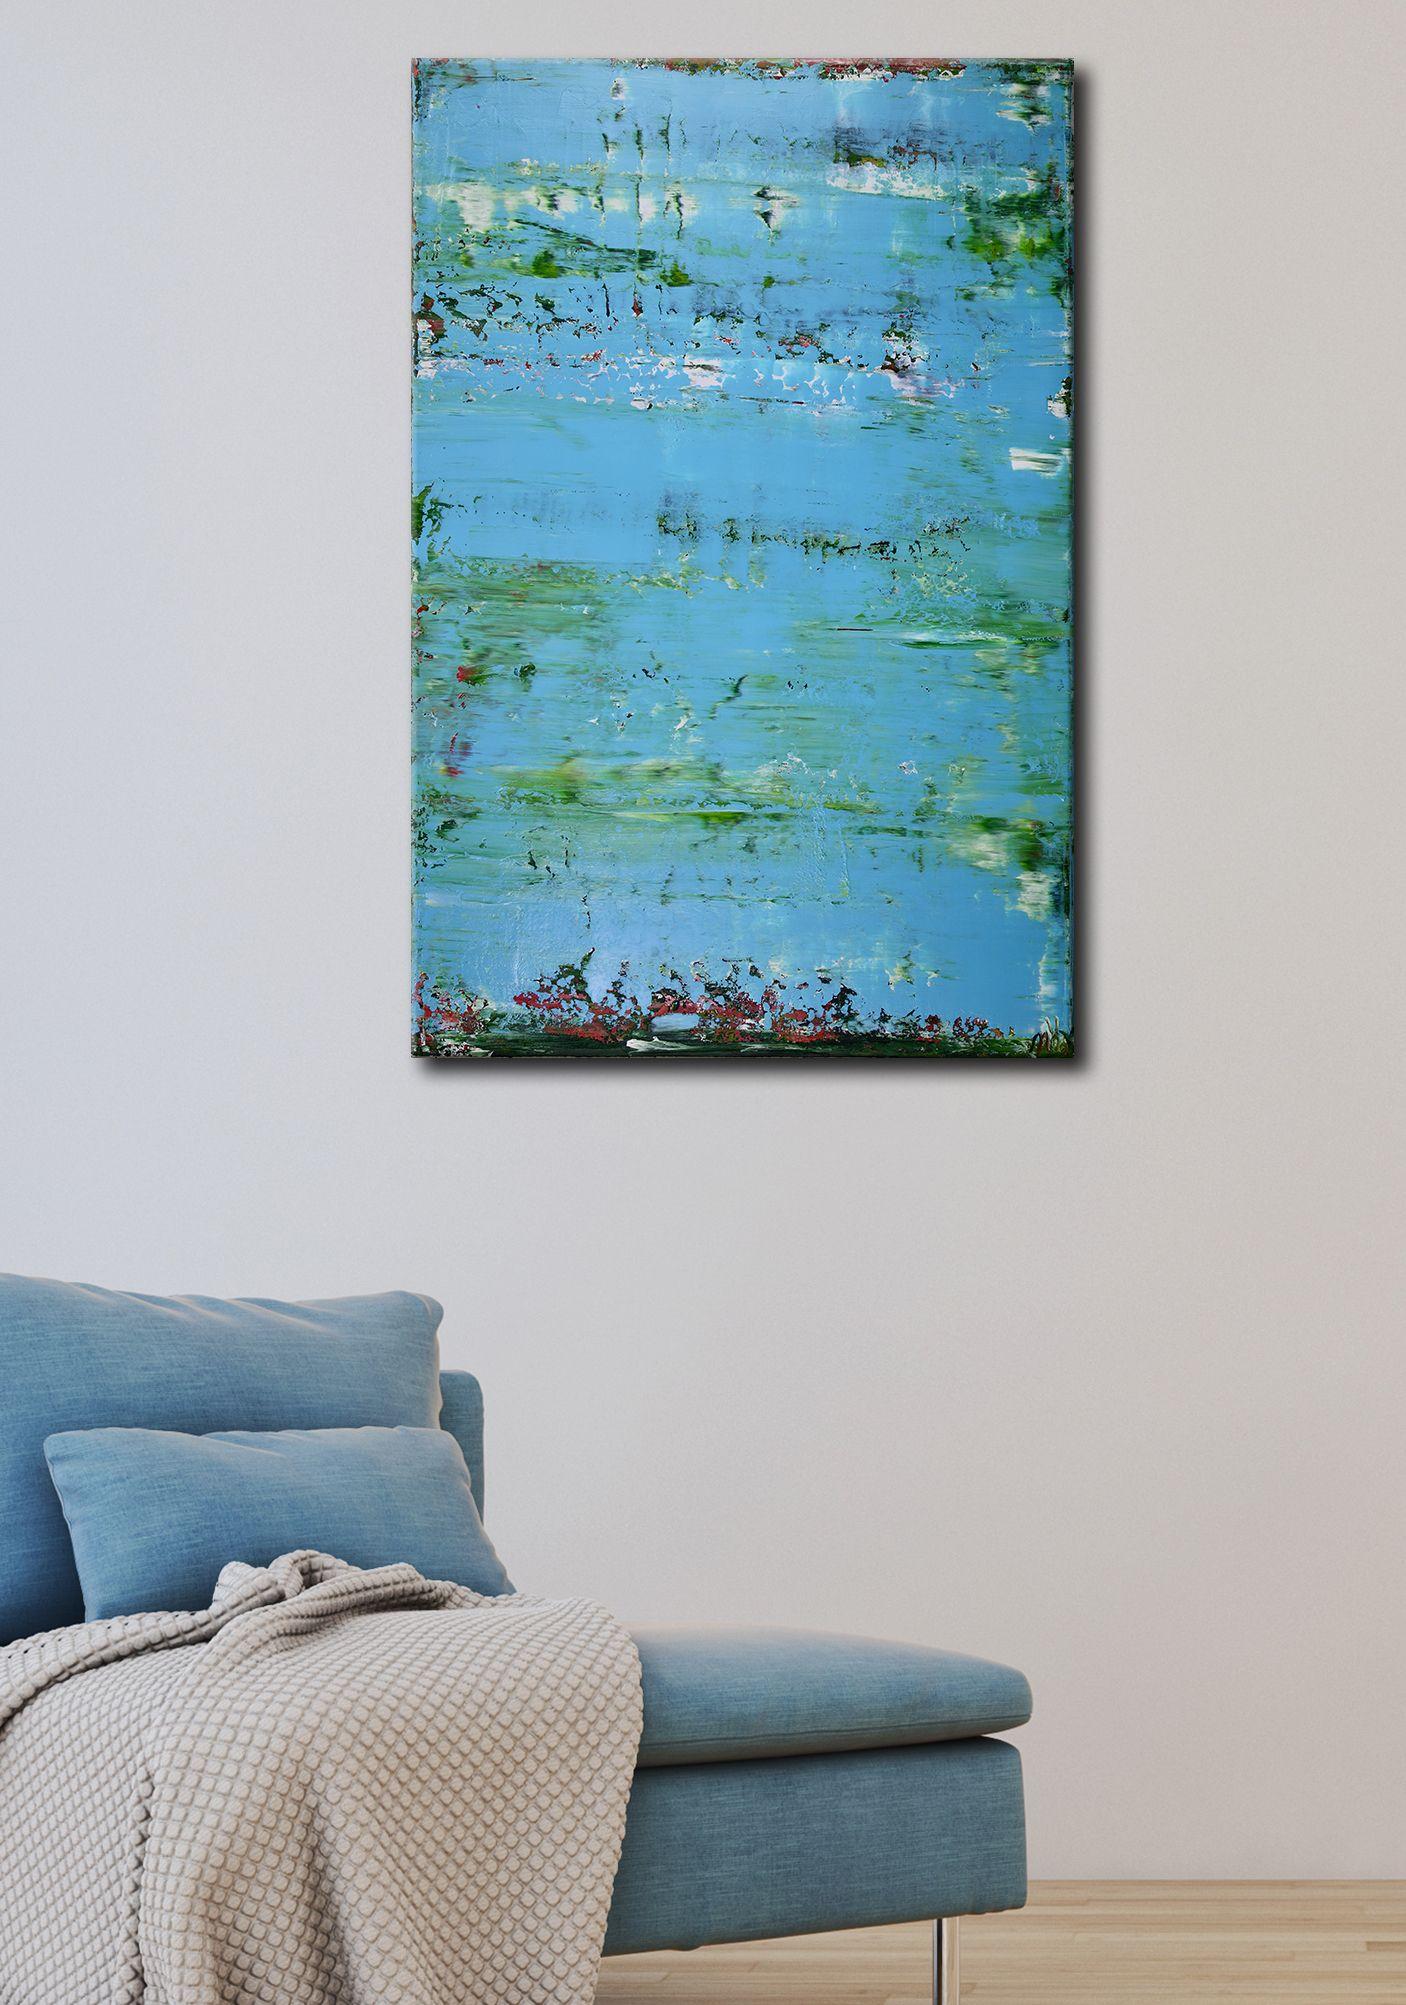 Bright blue abstract minimalist colorfield, bright, inspired by nature. Green and magenta details, this artwork was created using palette knifes and color blending. Arrives mounted in a wooden frame, signed in front and ready to hang!    I include a